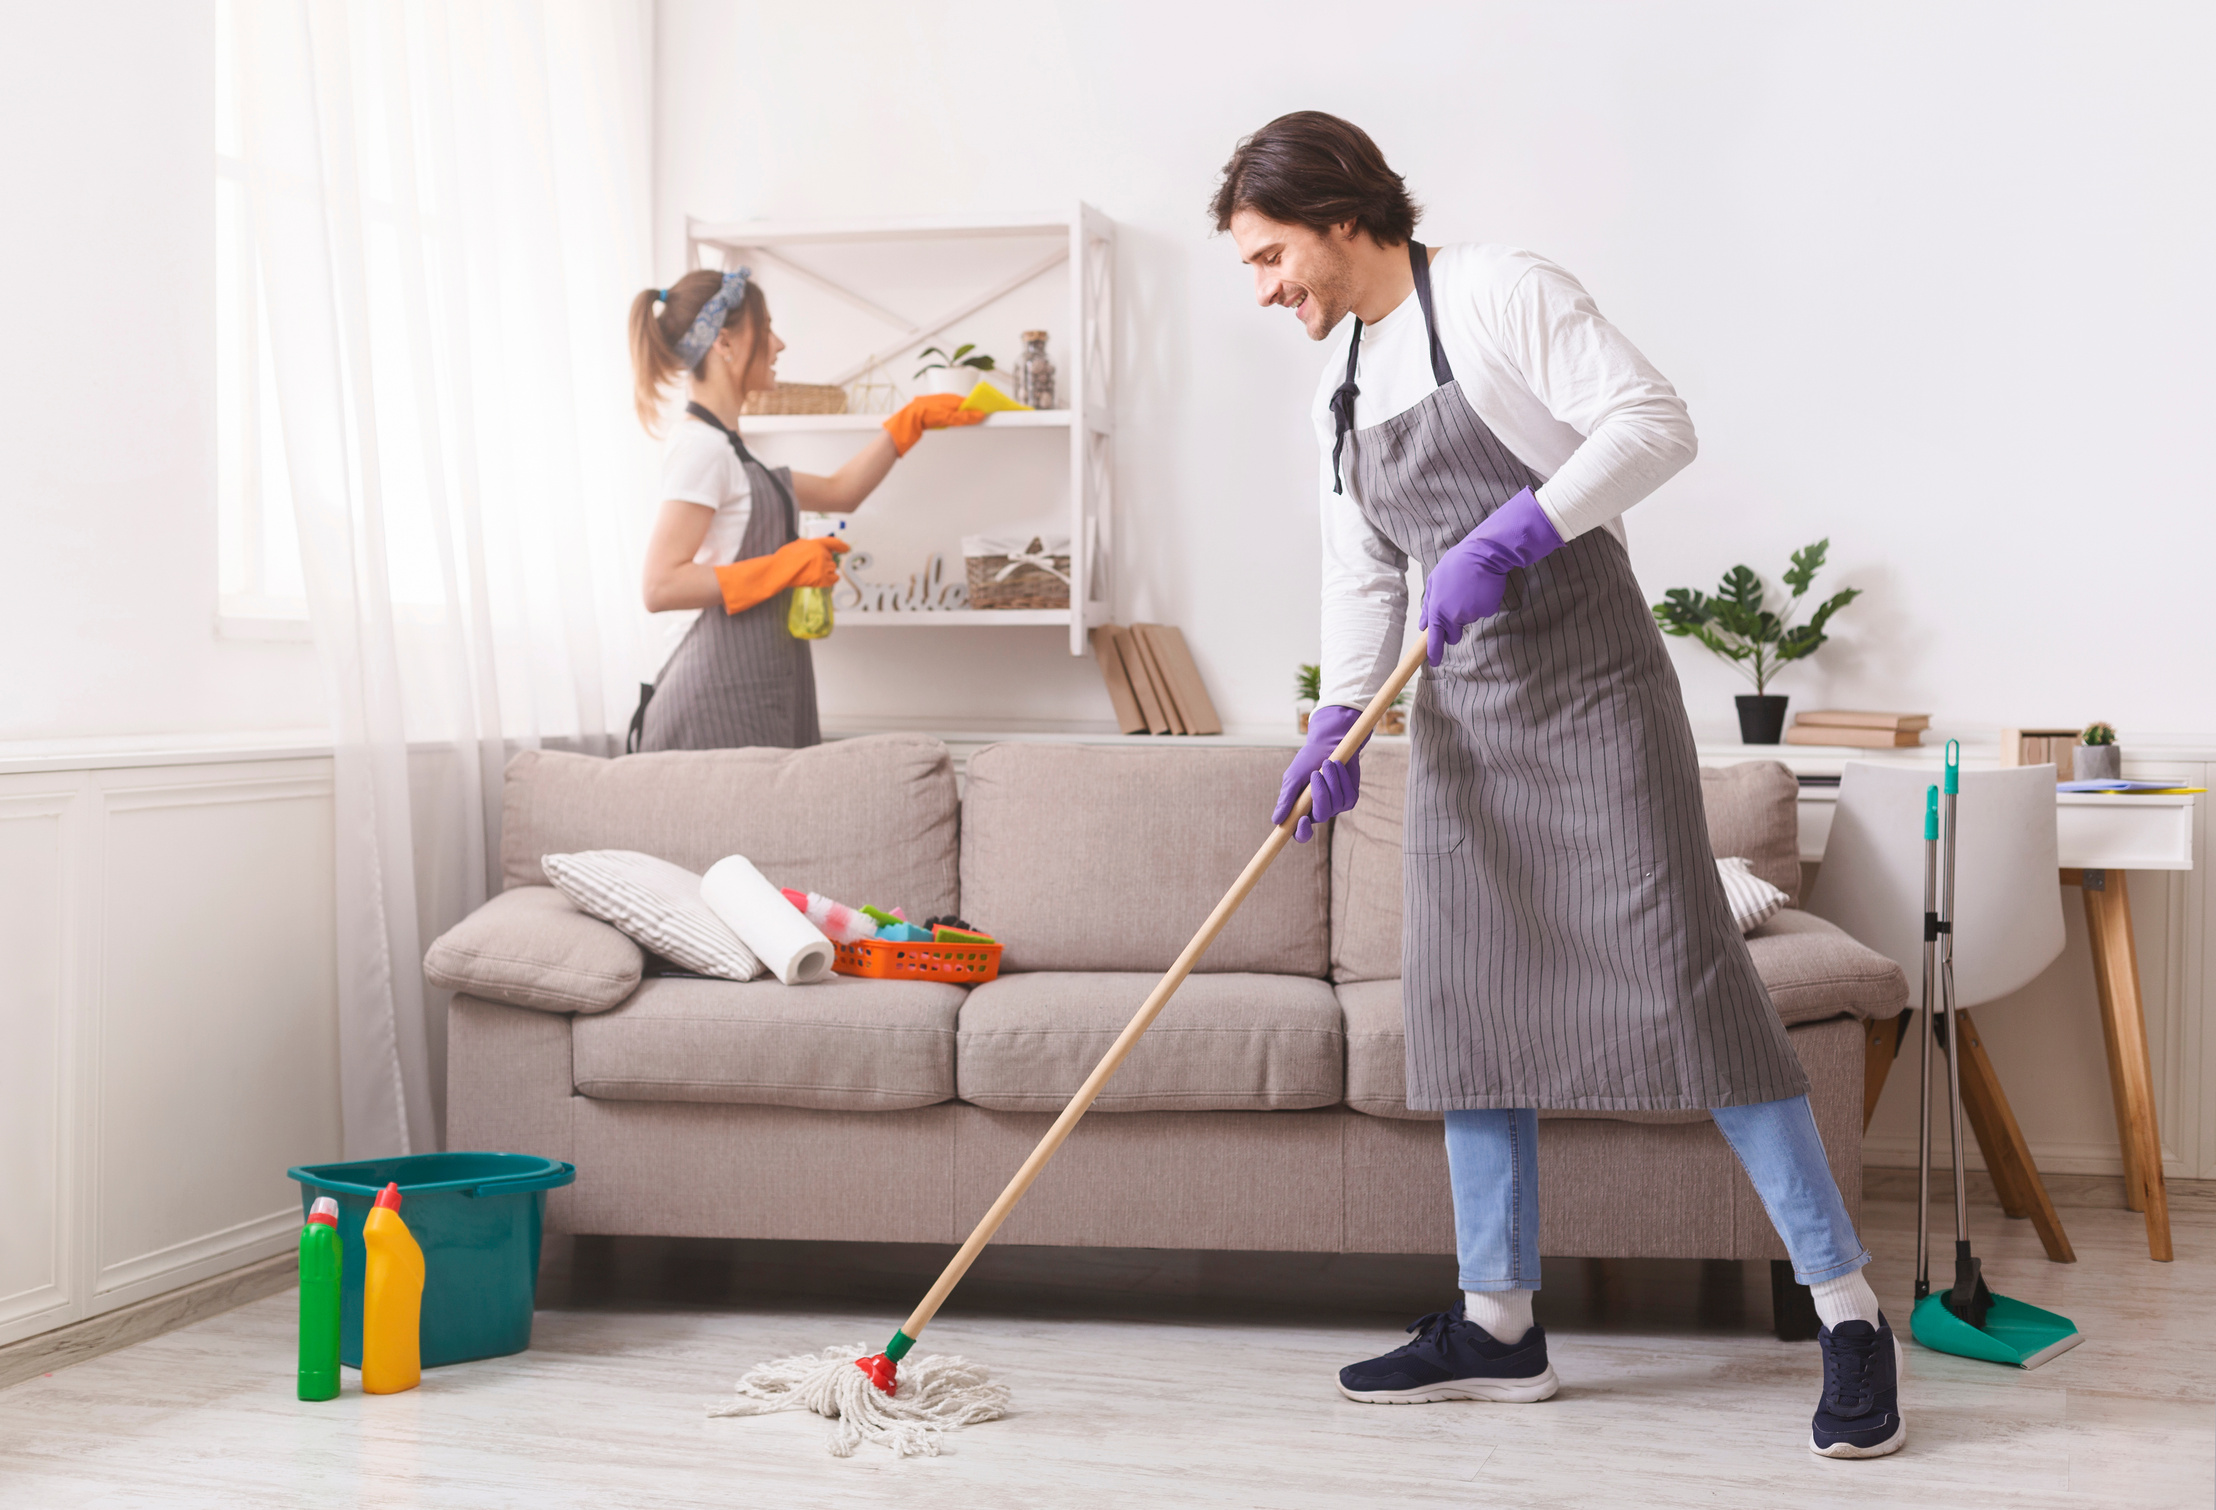 Residential Cleaning Services. Couple Of Skilled Housekeepers Tidying Up Apartment